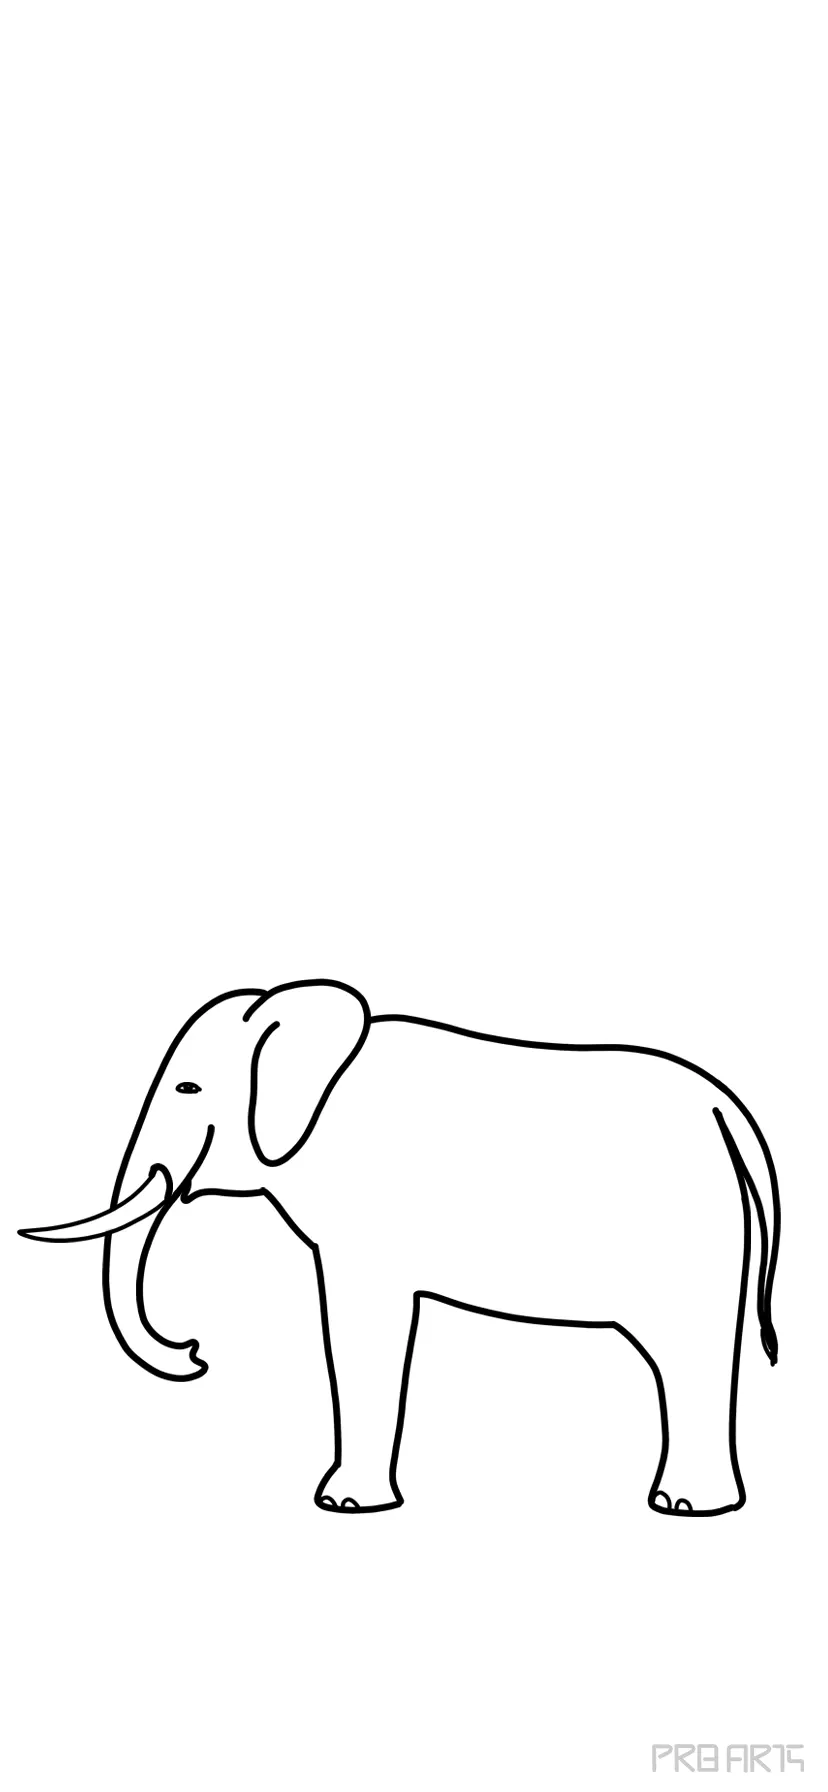 How to draw an African Elephant step by step – Easy Animals 2 Draw